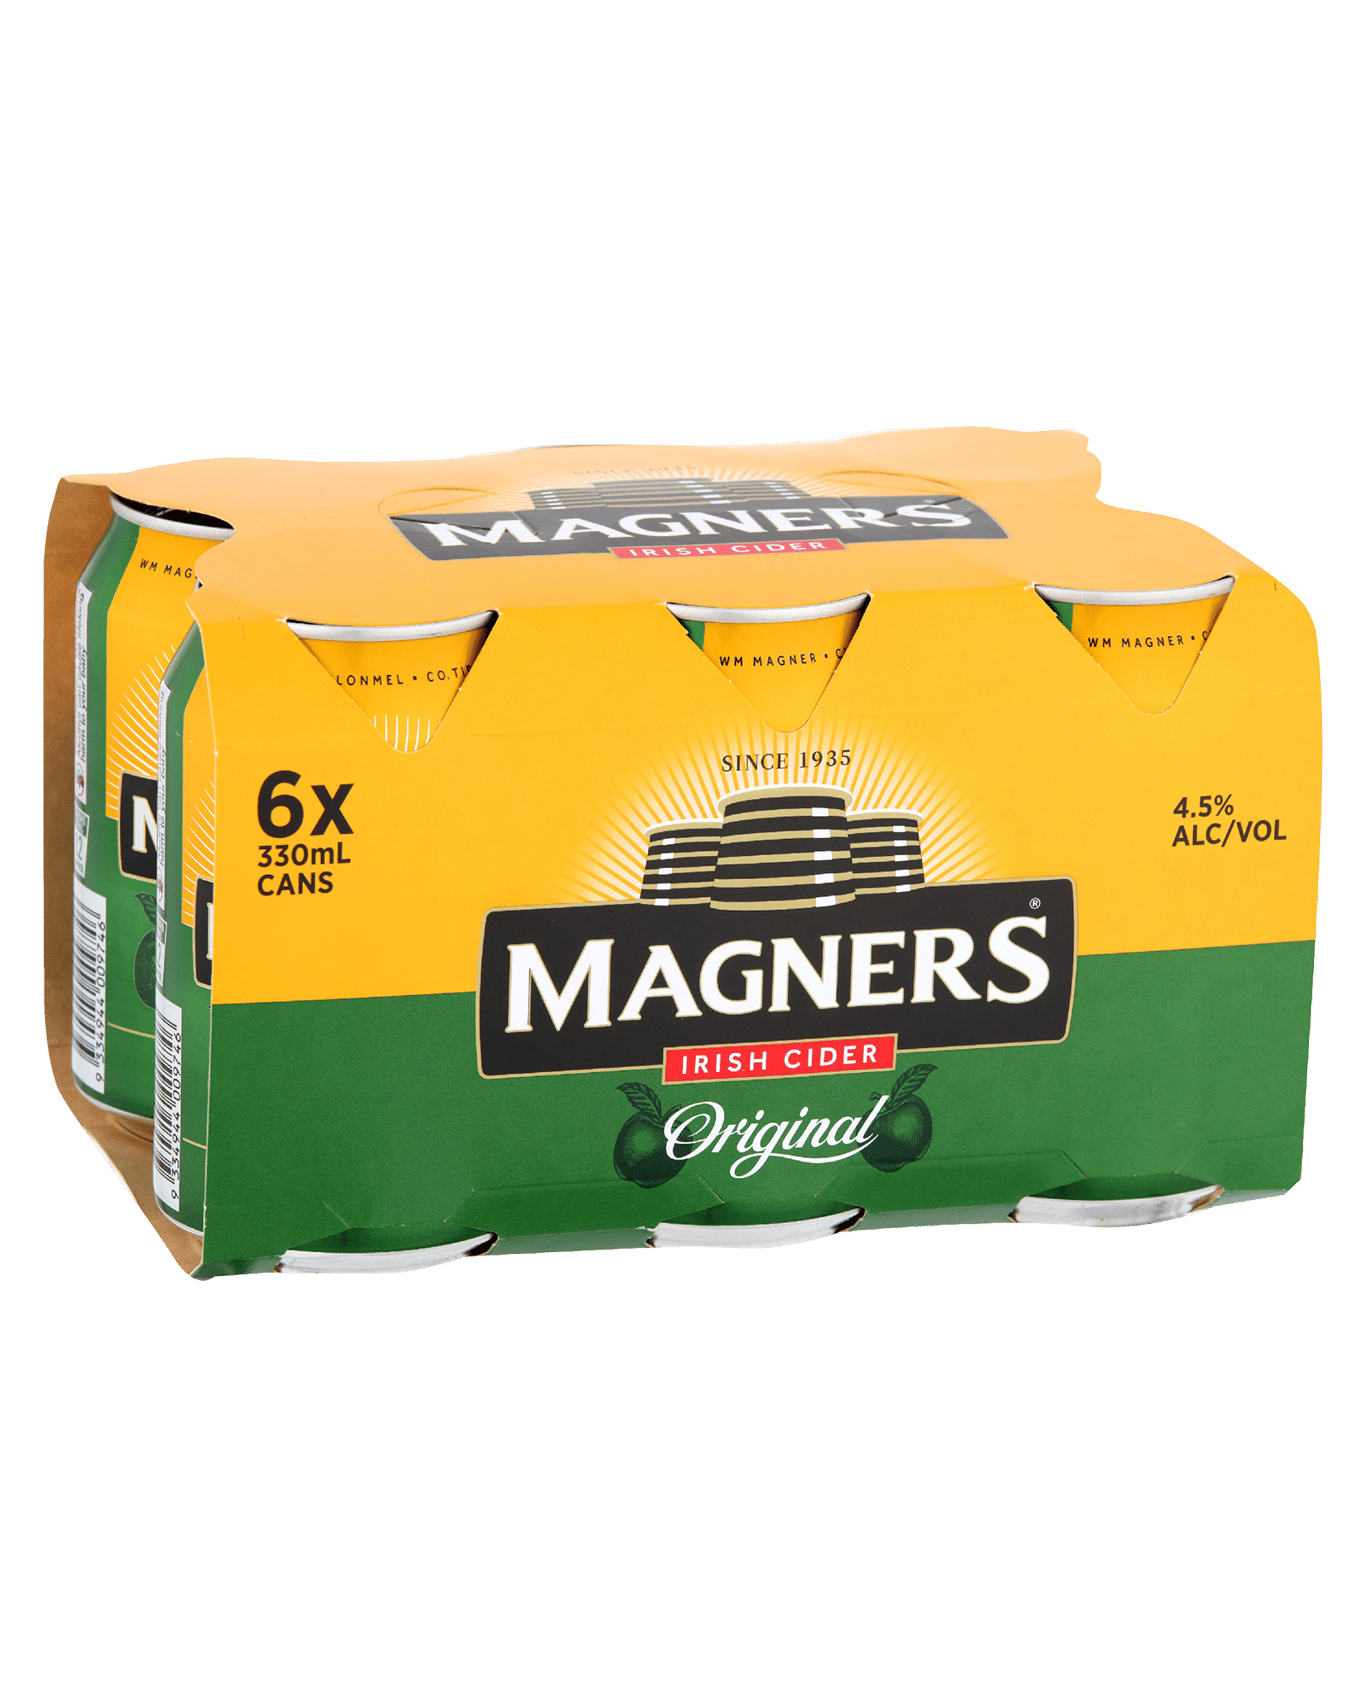 Buy Magners Irish Cider Cans 330ml Online (Lowest Price Guarantee ...